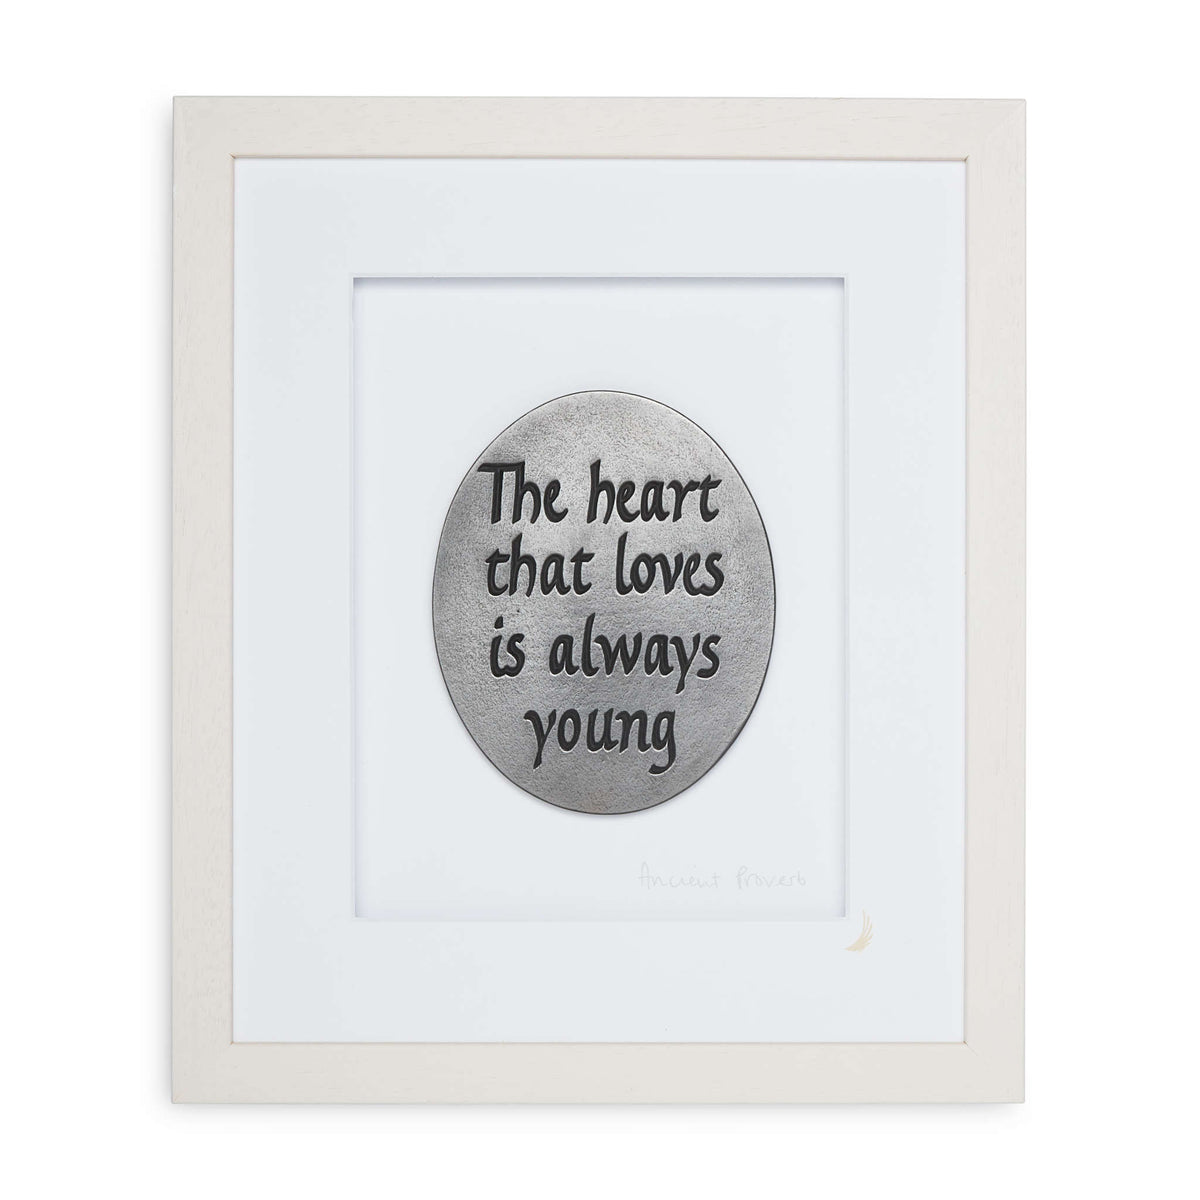 The heart that loves is always young